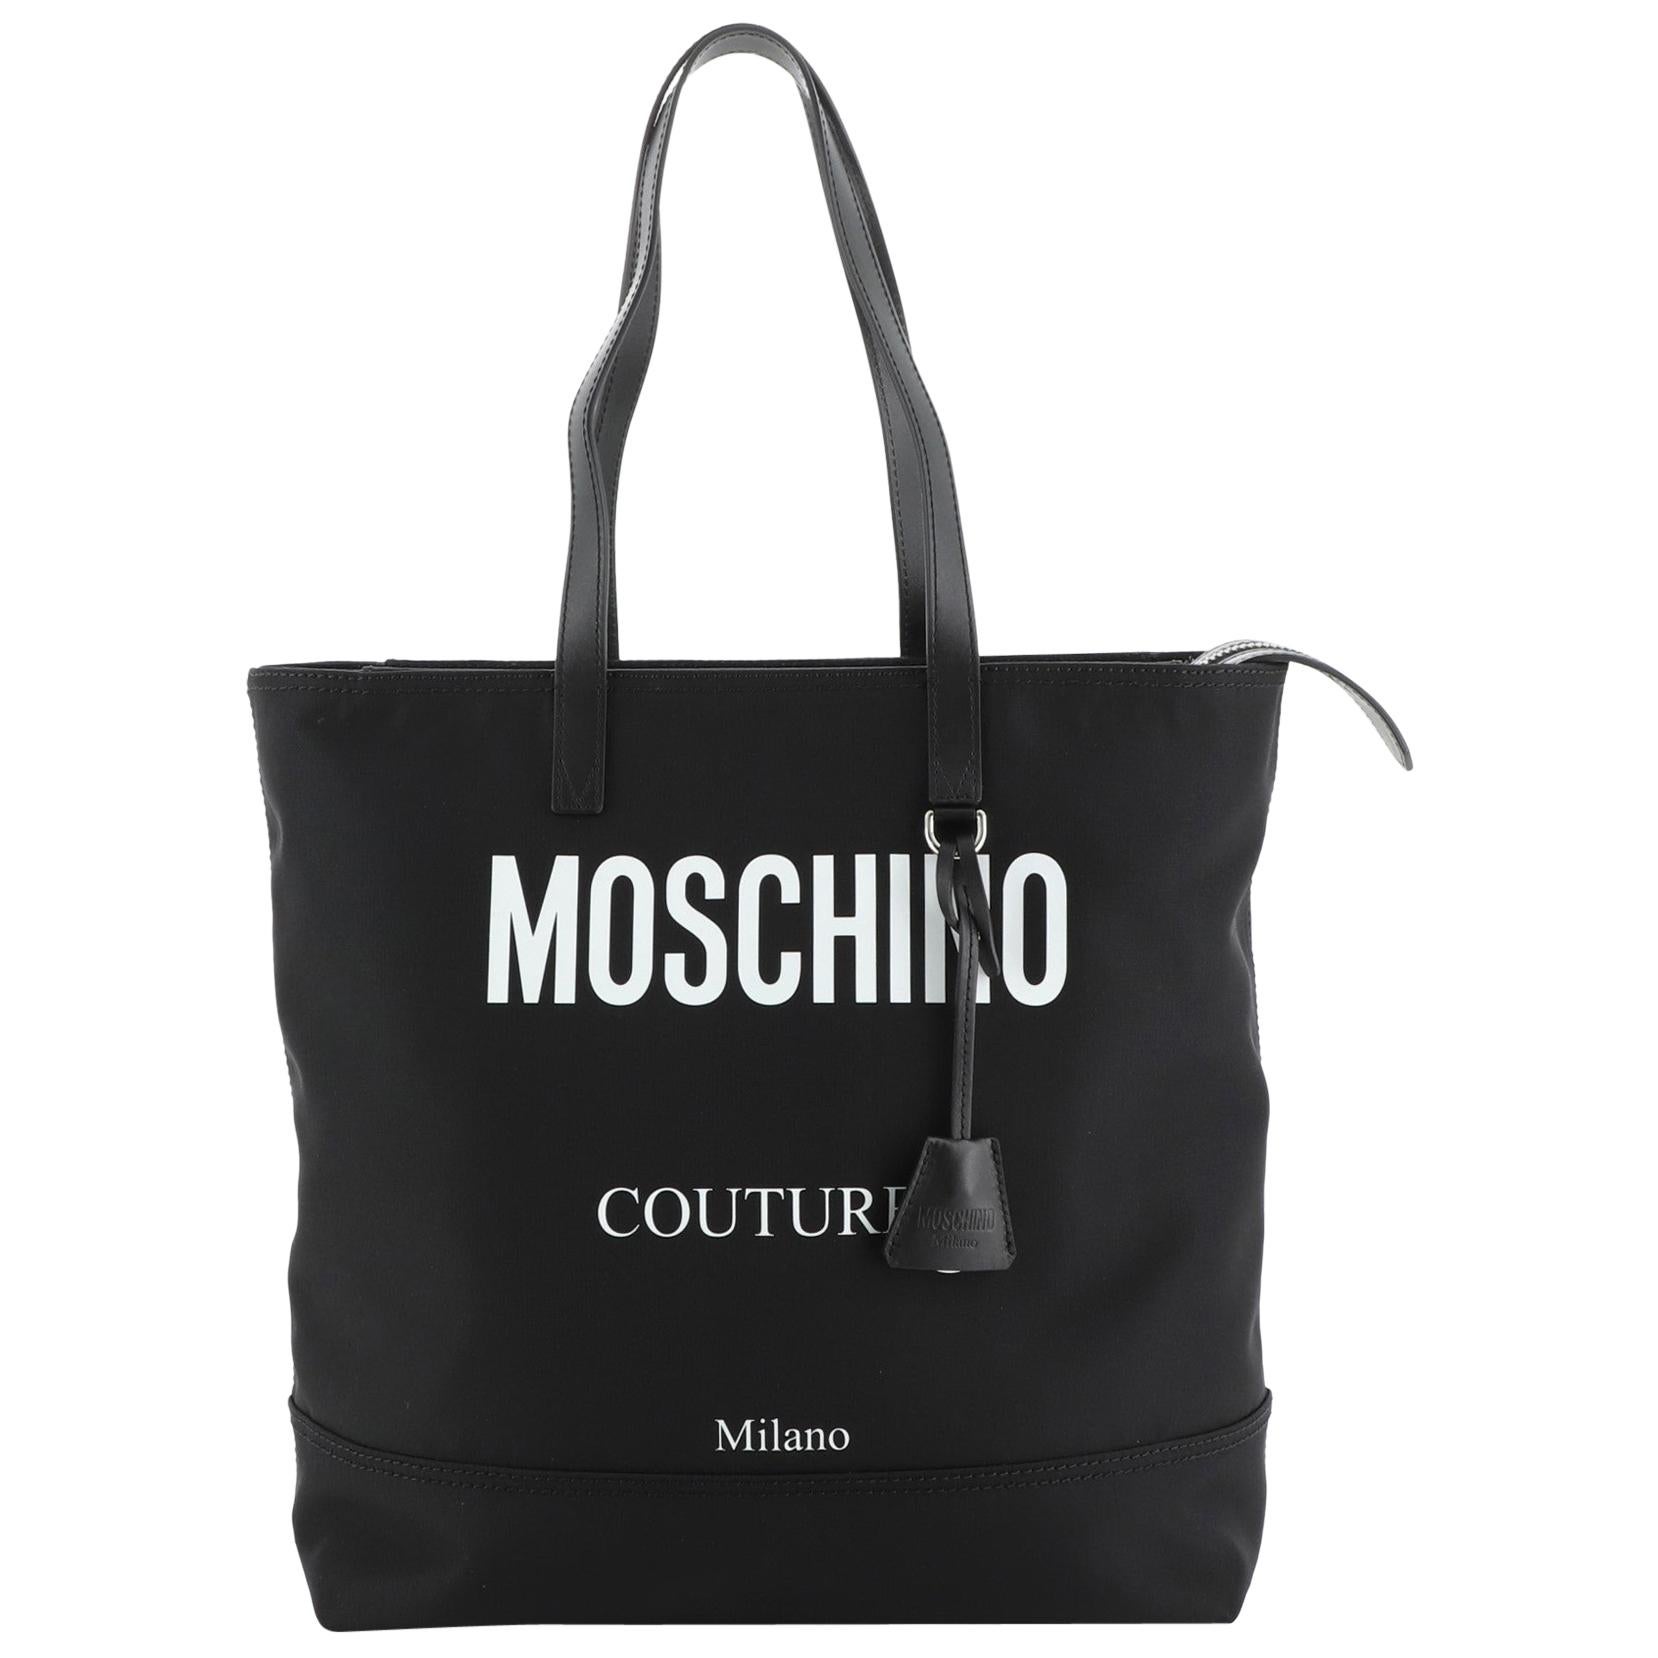 Moschino Couture Tote Nylon Large